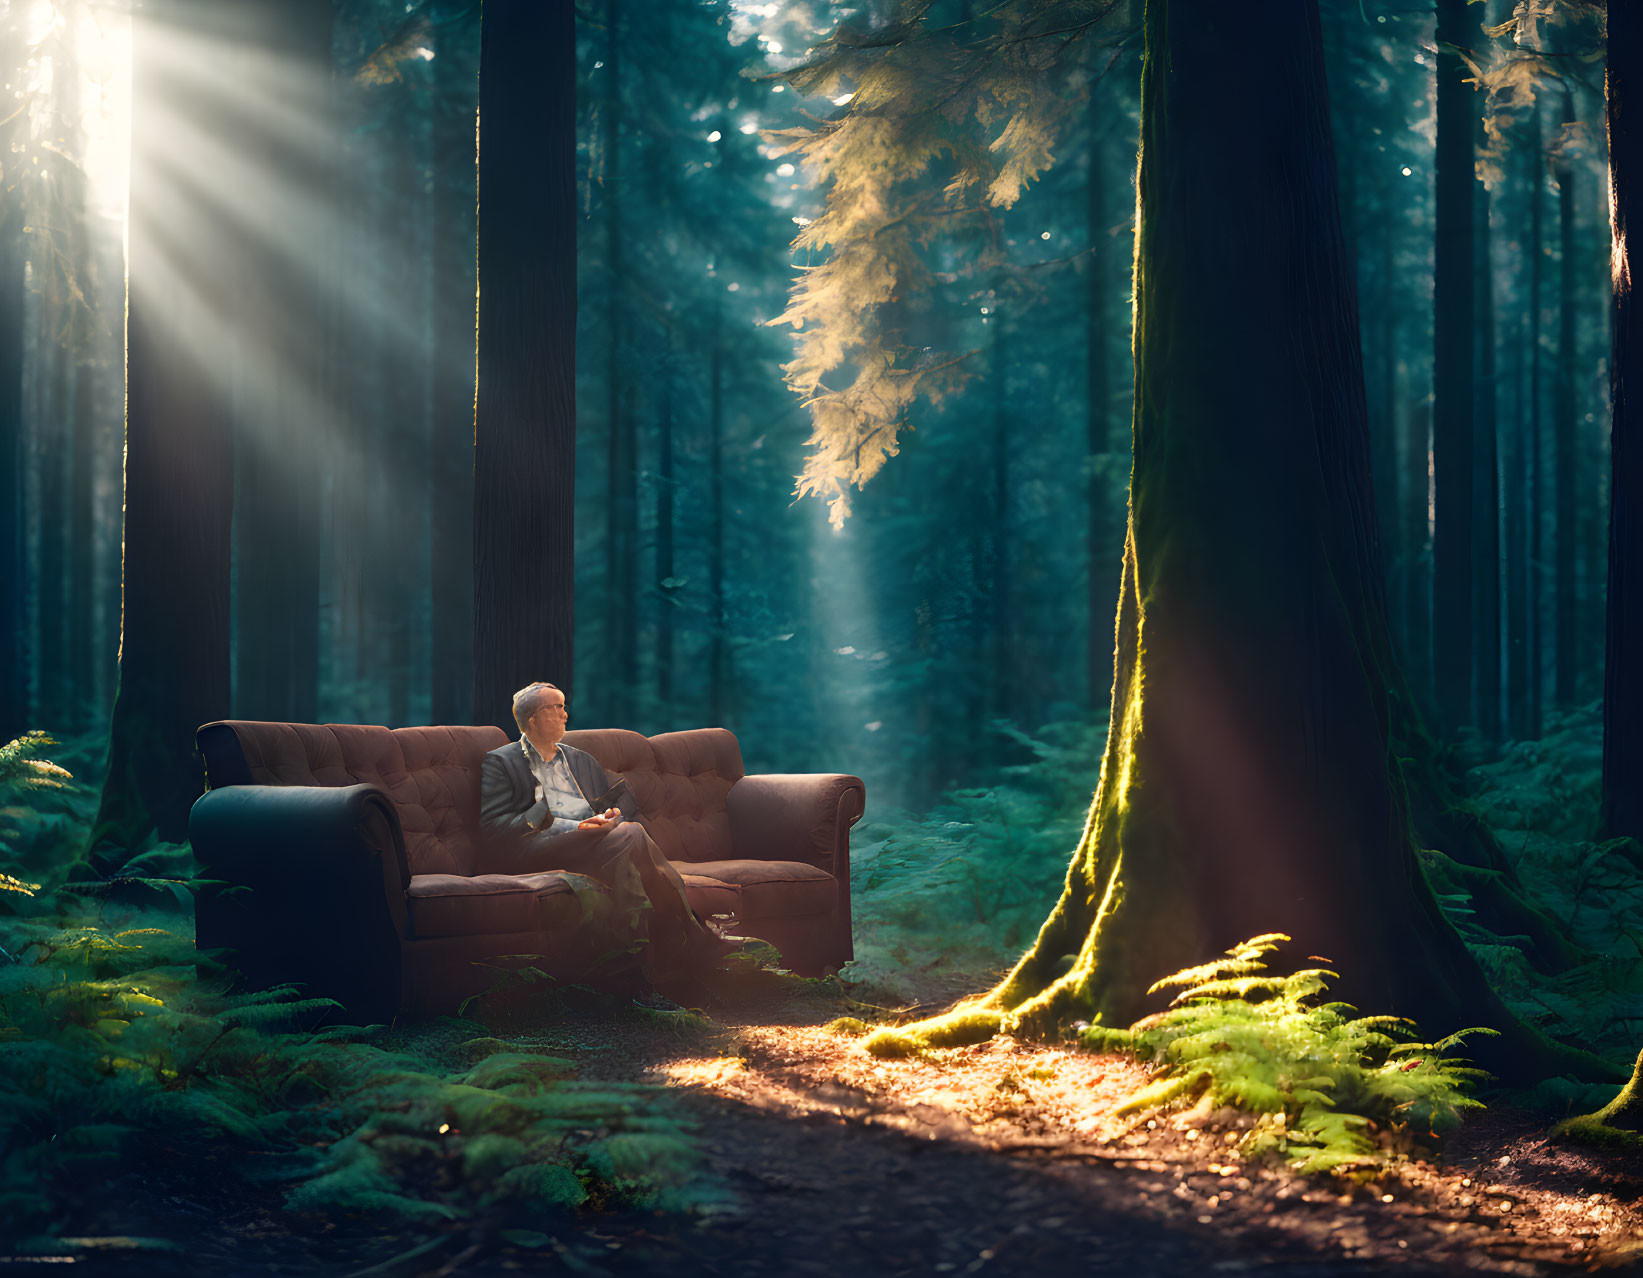 Tranquil forest scene with person on sofa in sunlight